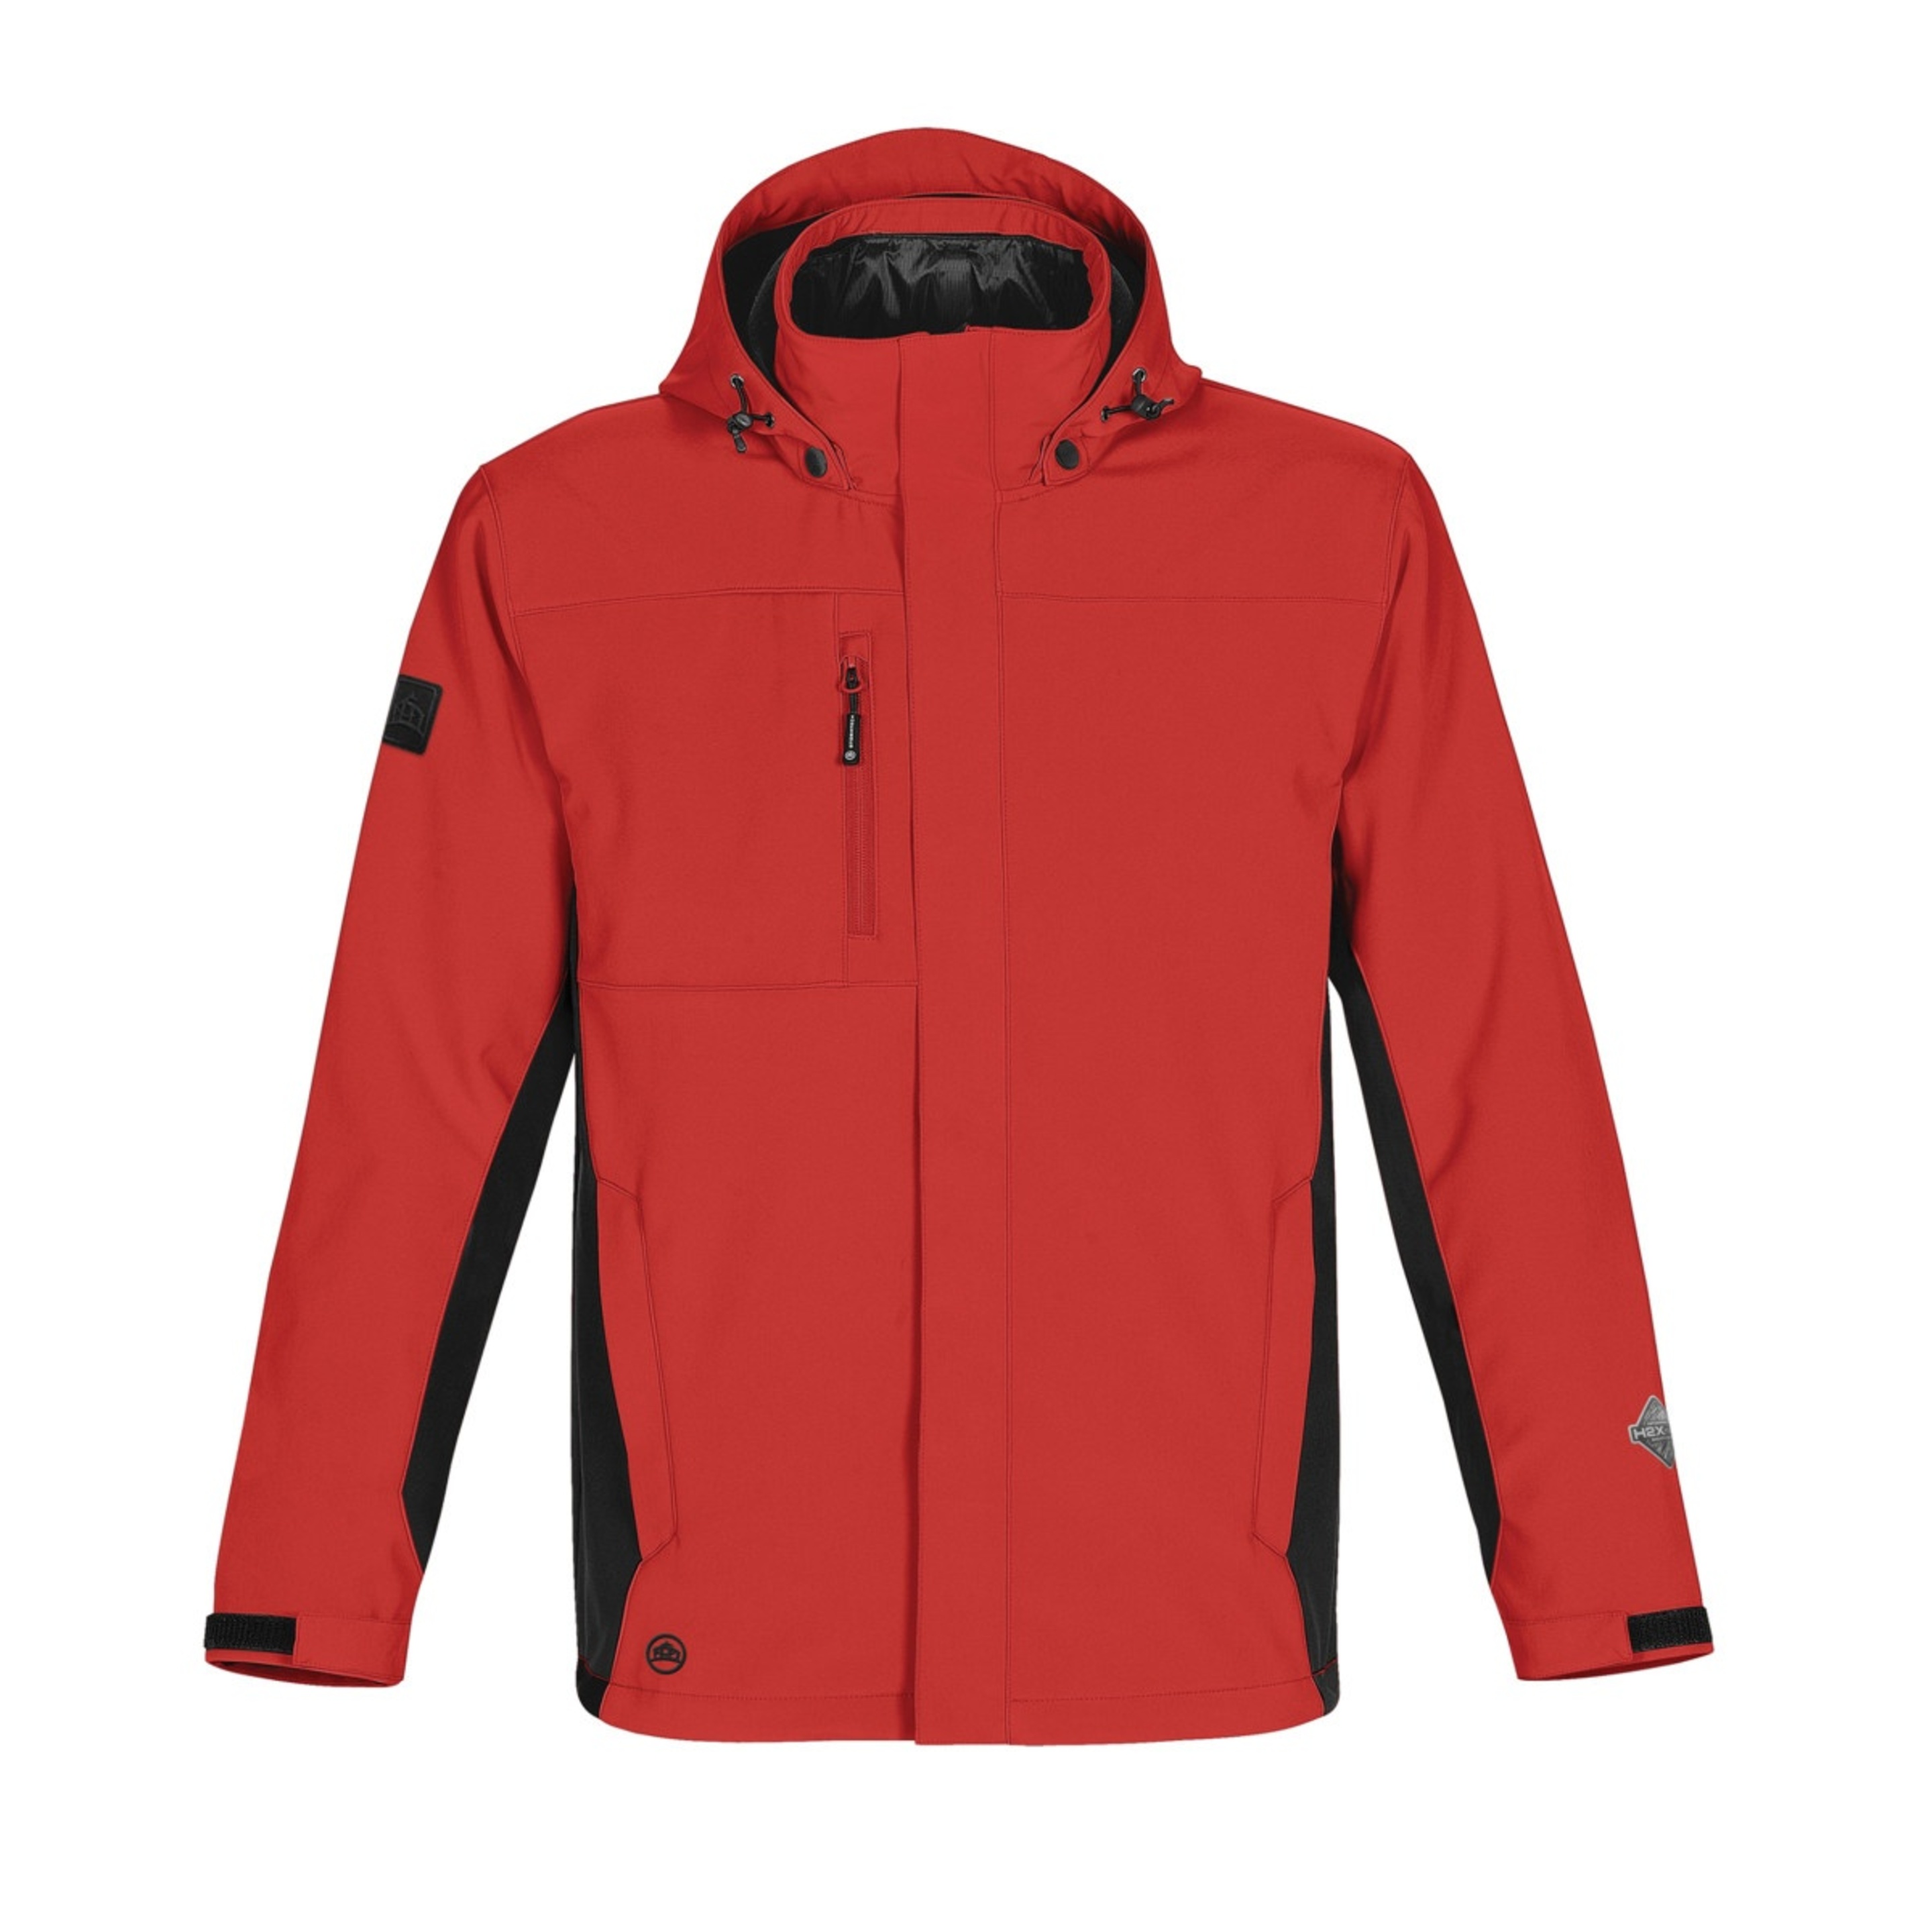 Chaqueta Impermeable Y Transpirable Modelo Atmosphere Stormtech - rojo - 